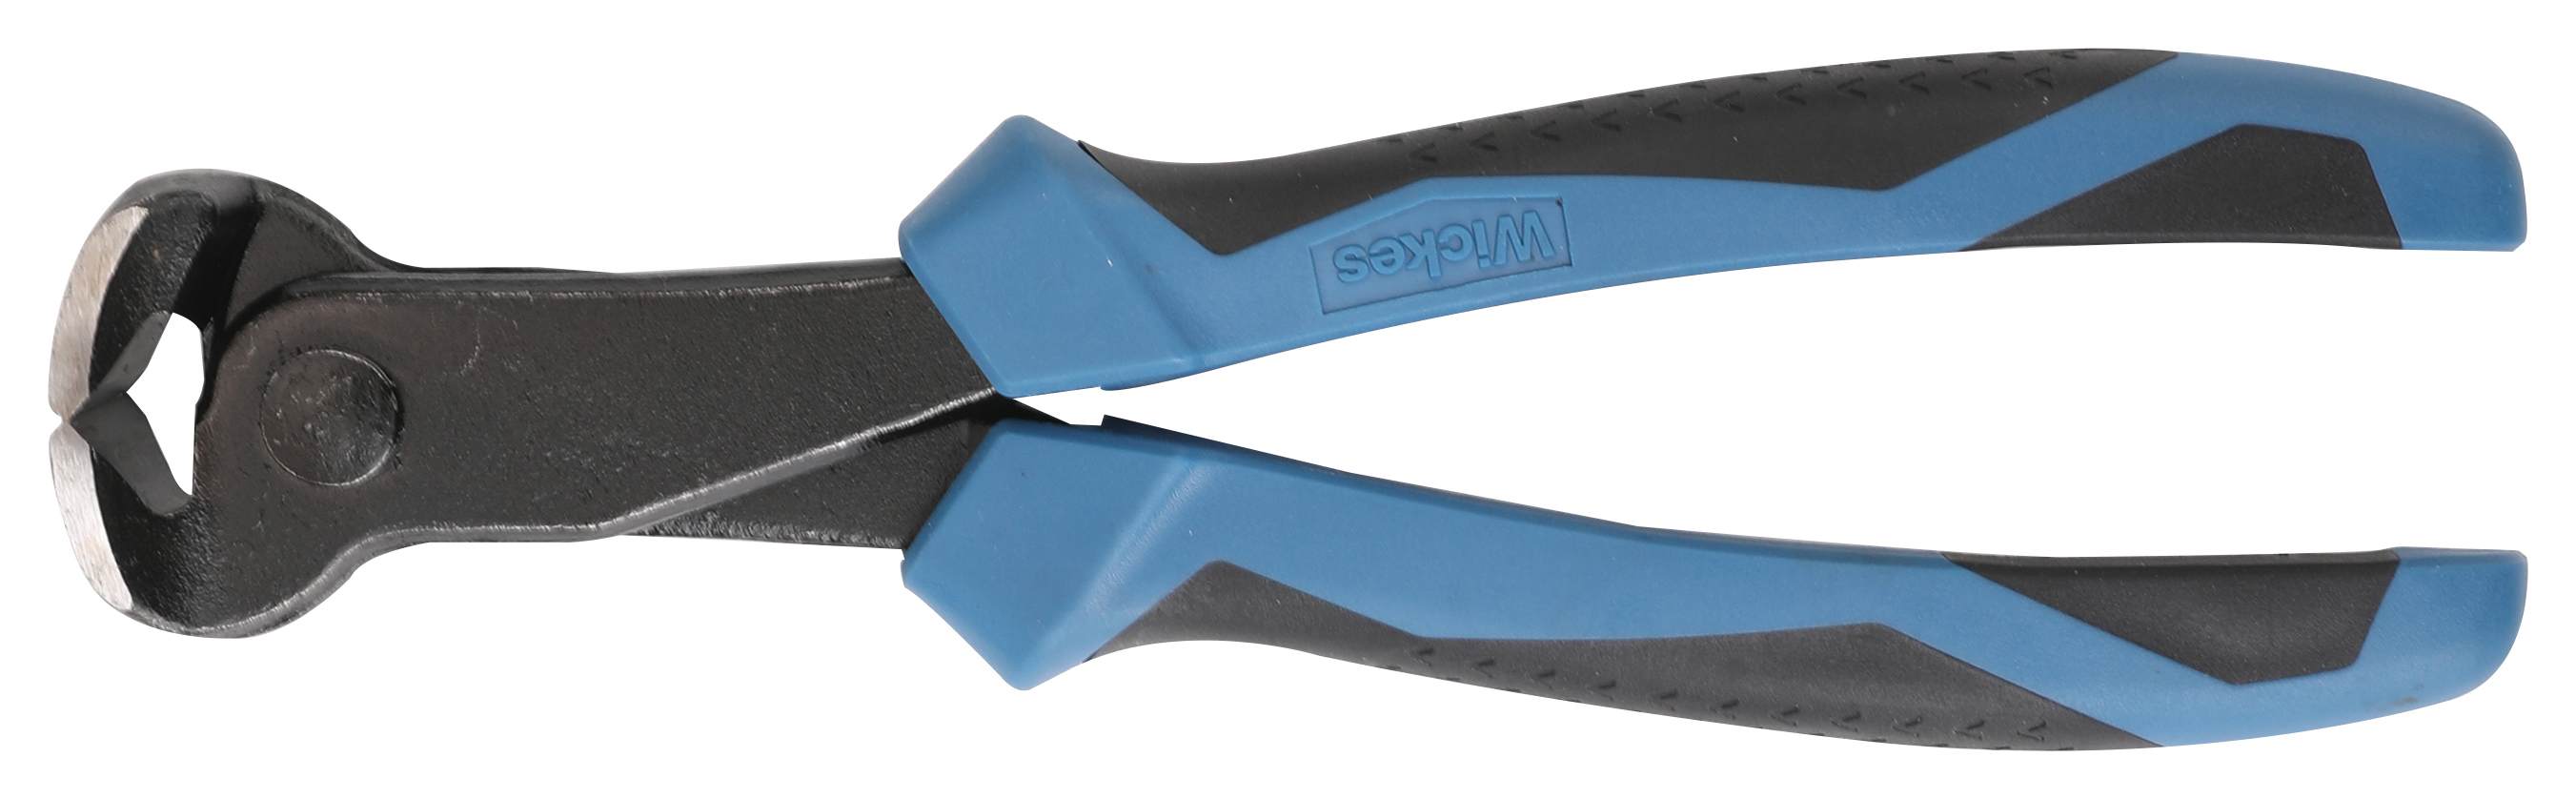 Wickes End Wire Cutting Pliers - 200mm